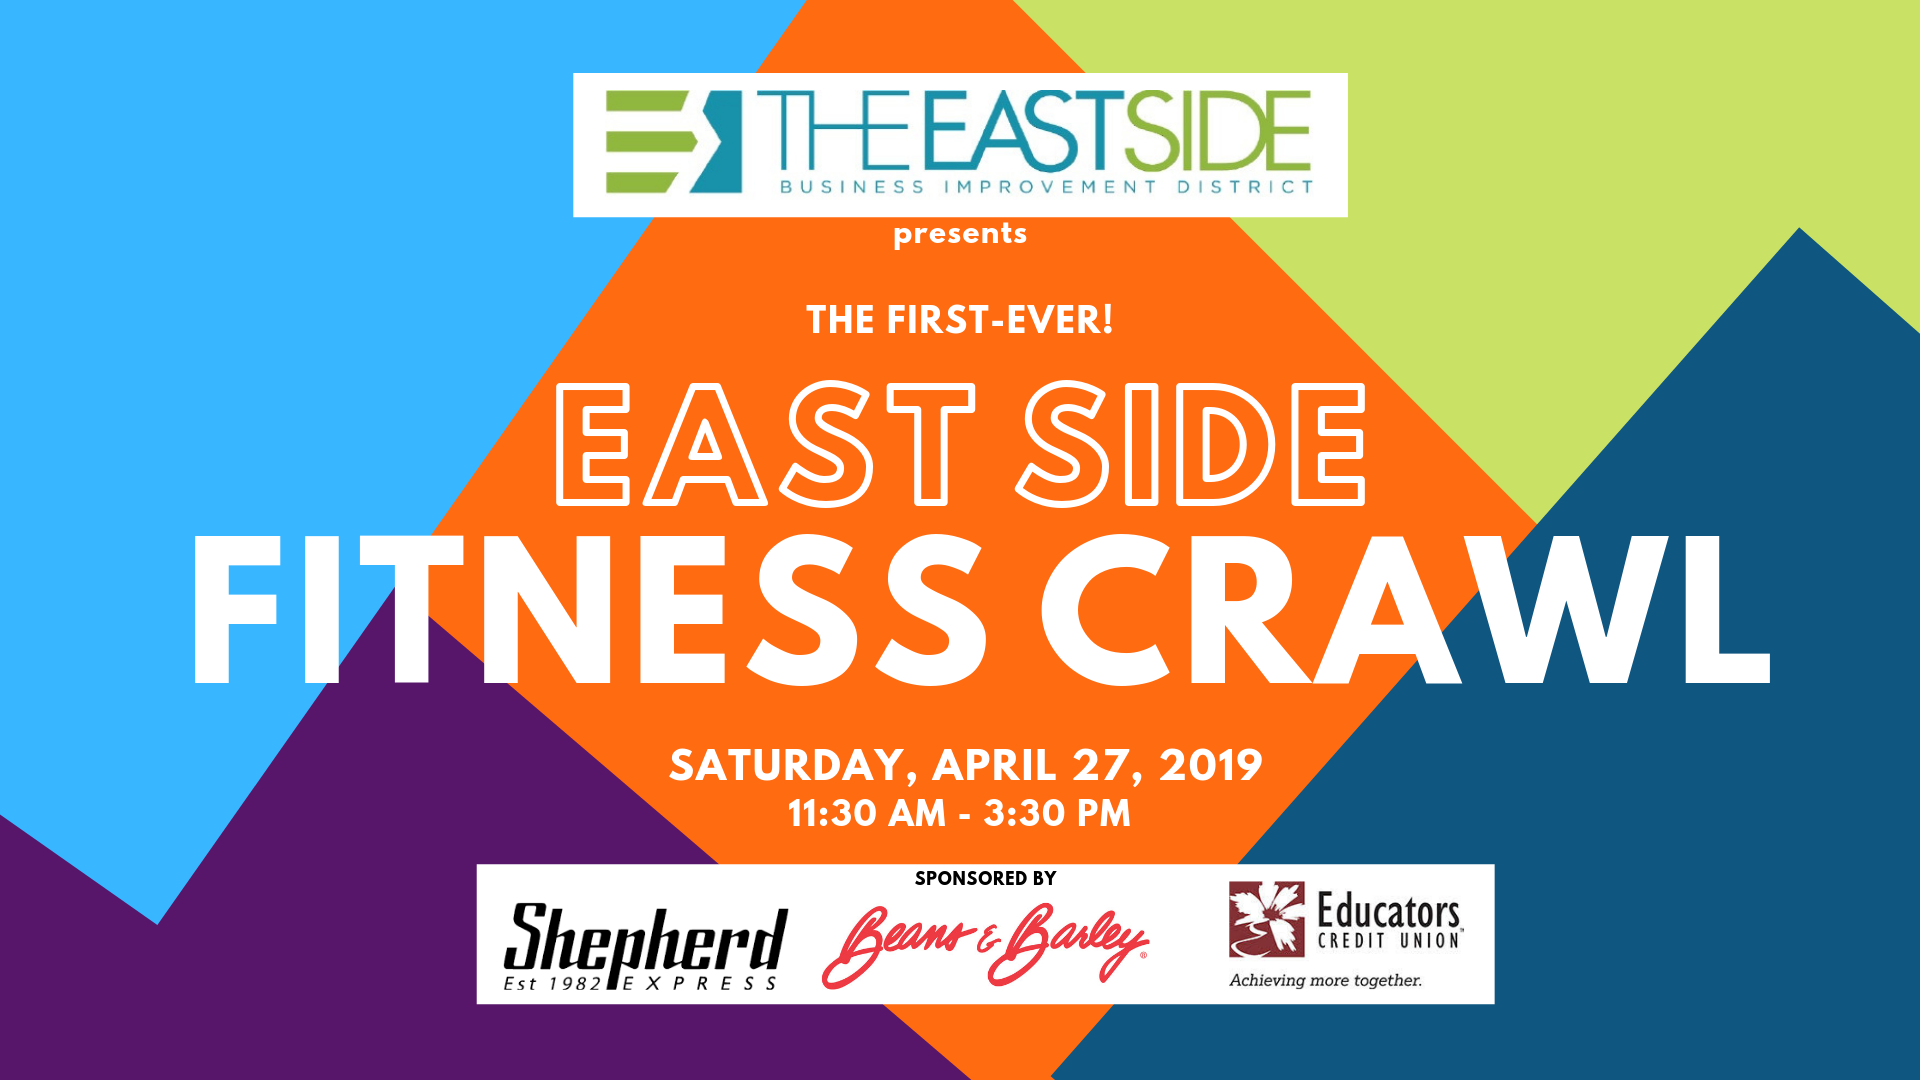 East side 'fitness crawl' scheduled for April 27